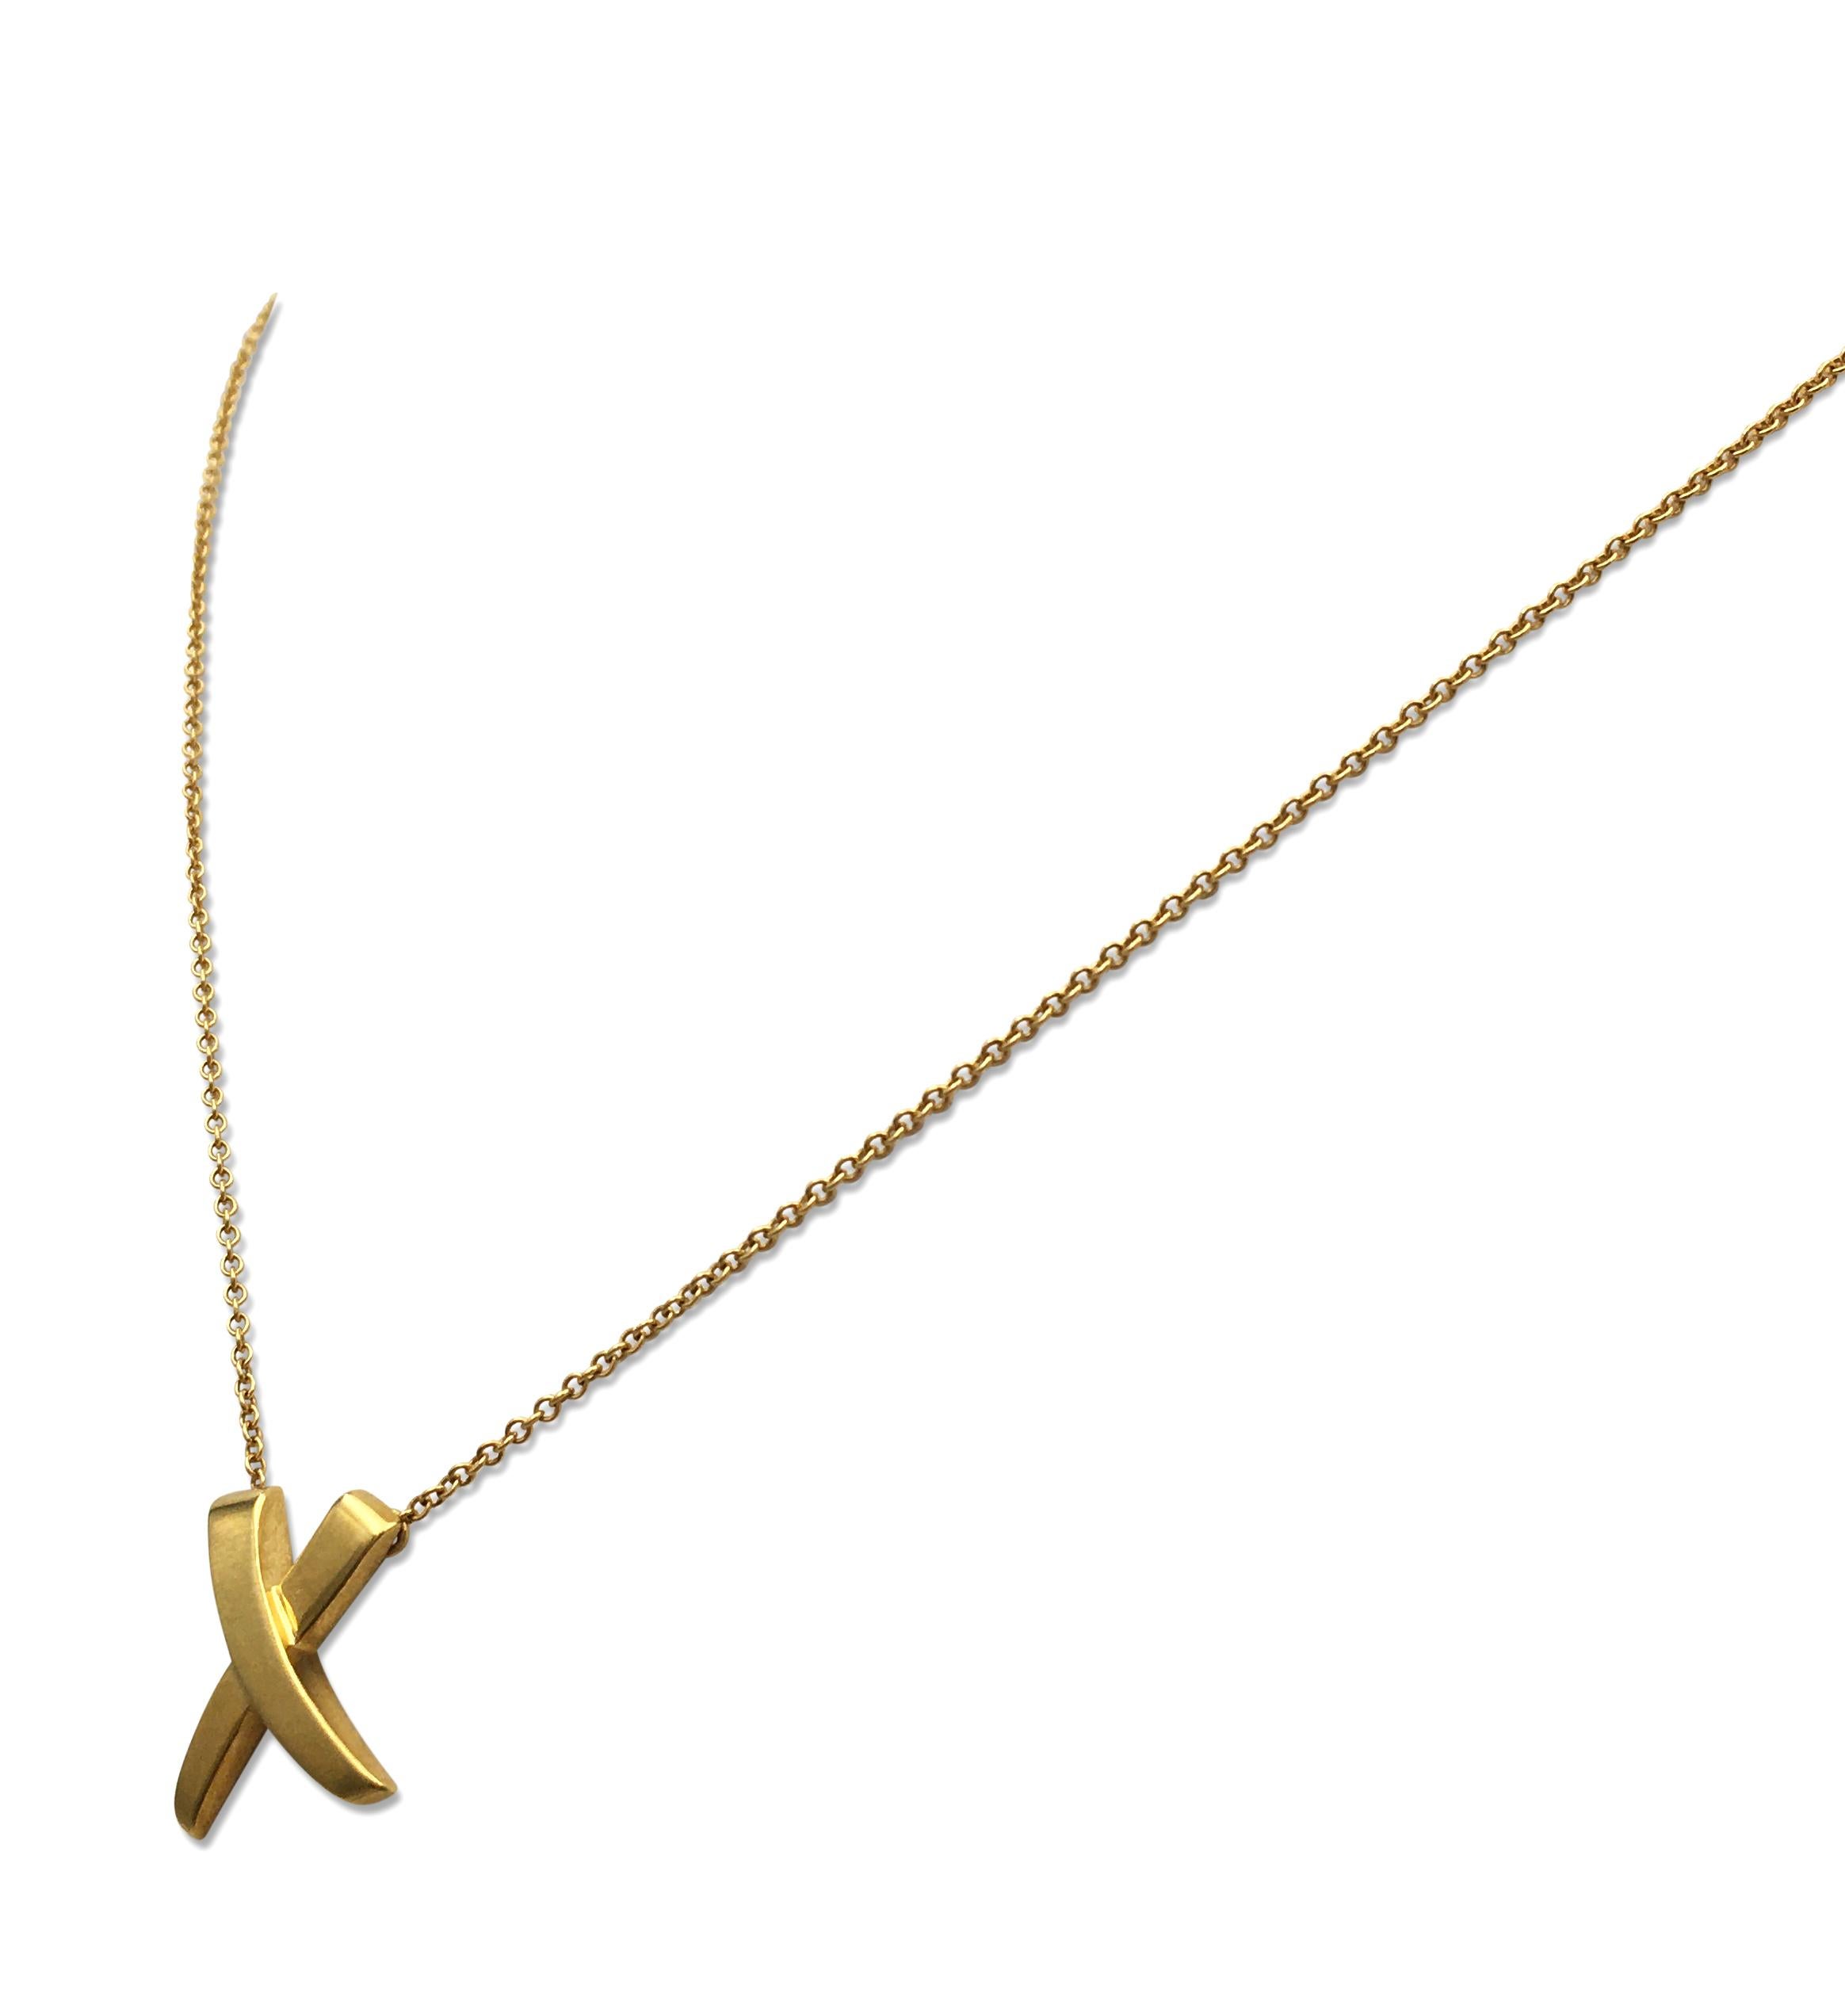 Authentic Paloma Picasso for Tiffany & Co. 'X' necklace crafted in 18 karat yellow gold. Signed Paloma Picasso, Tiffany & Co., 750. The pendant measures 11 x 12 mm, necklace measures 16 inches in length. The necklace is not presented with the